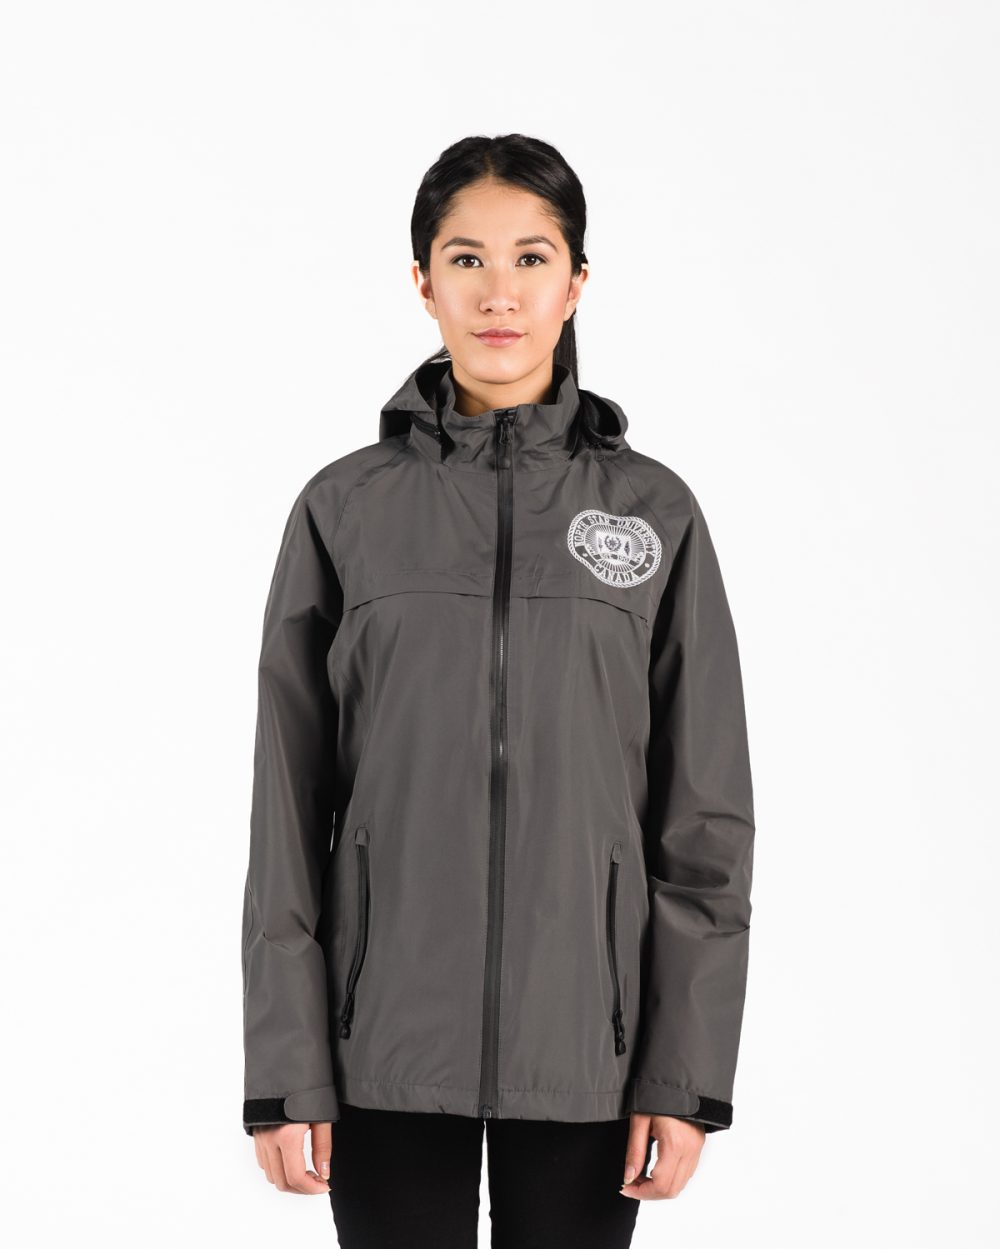 Signature Water Proof Jacket 118w in slate on woman.